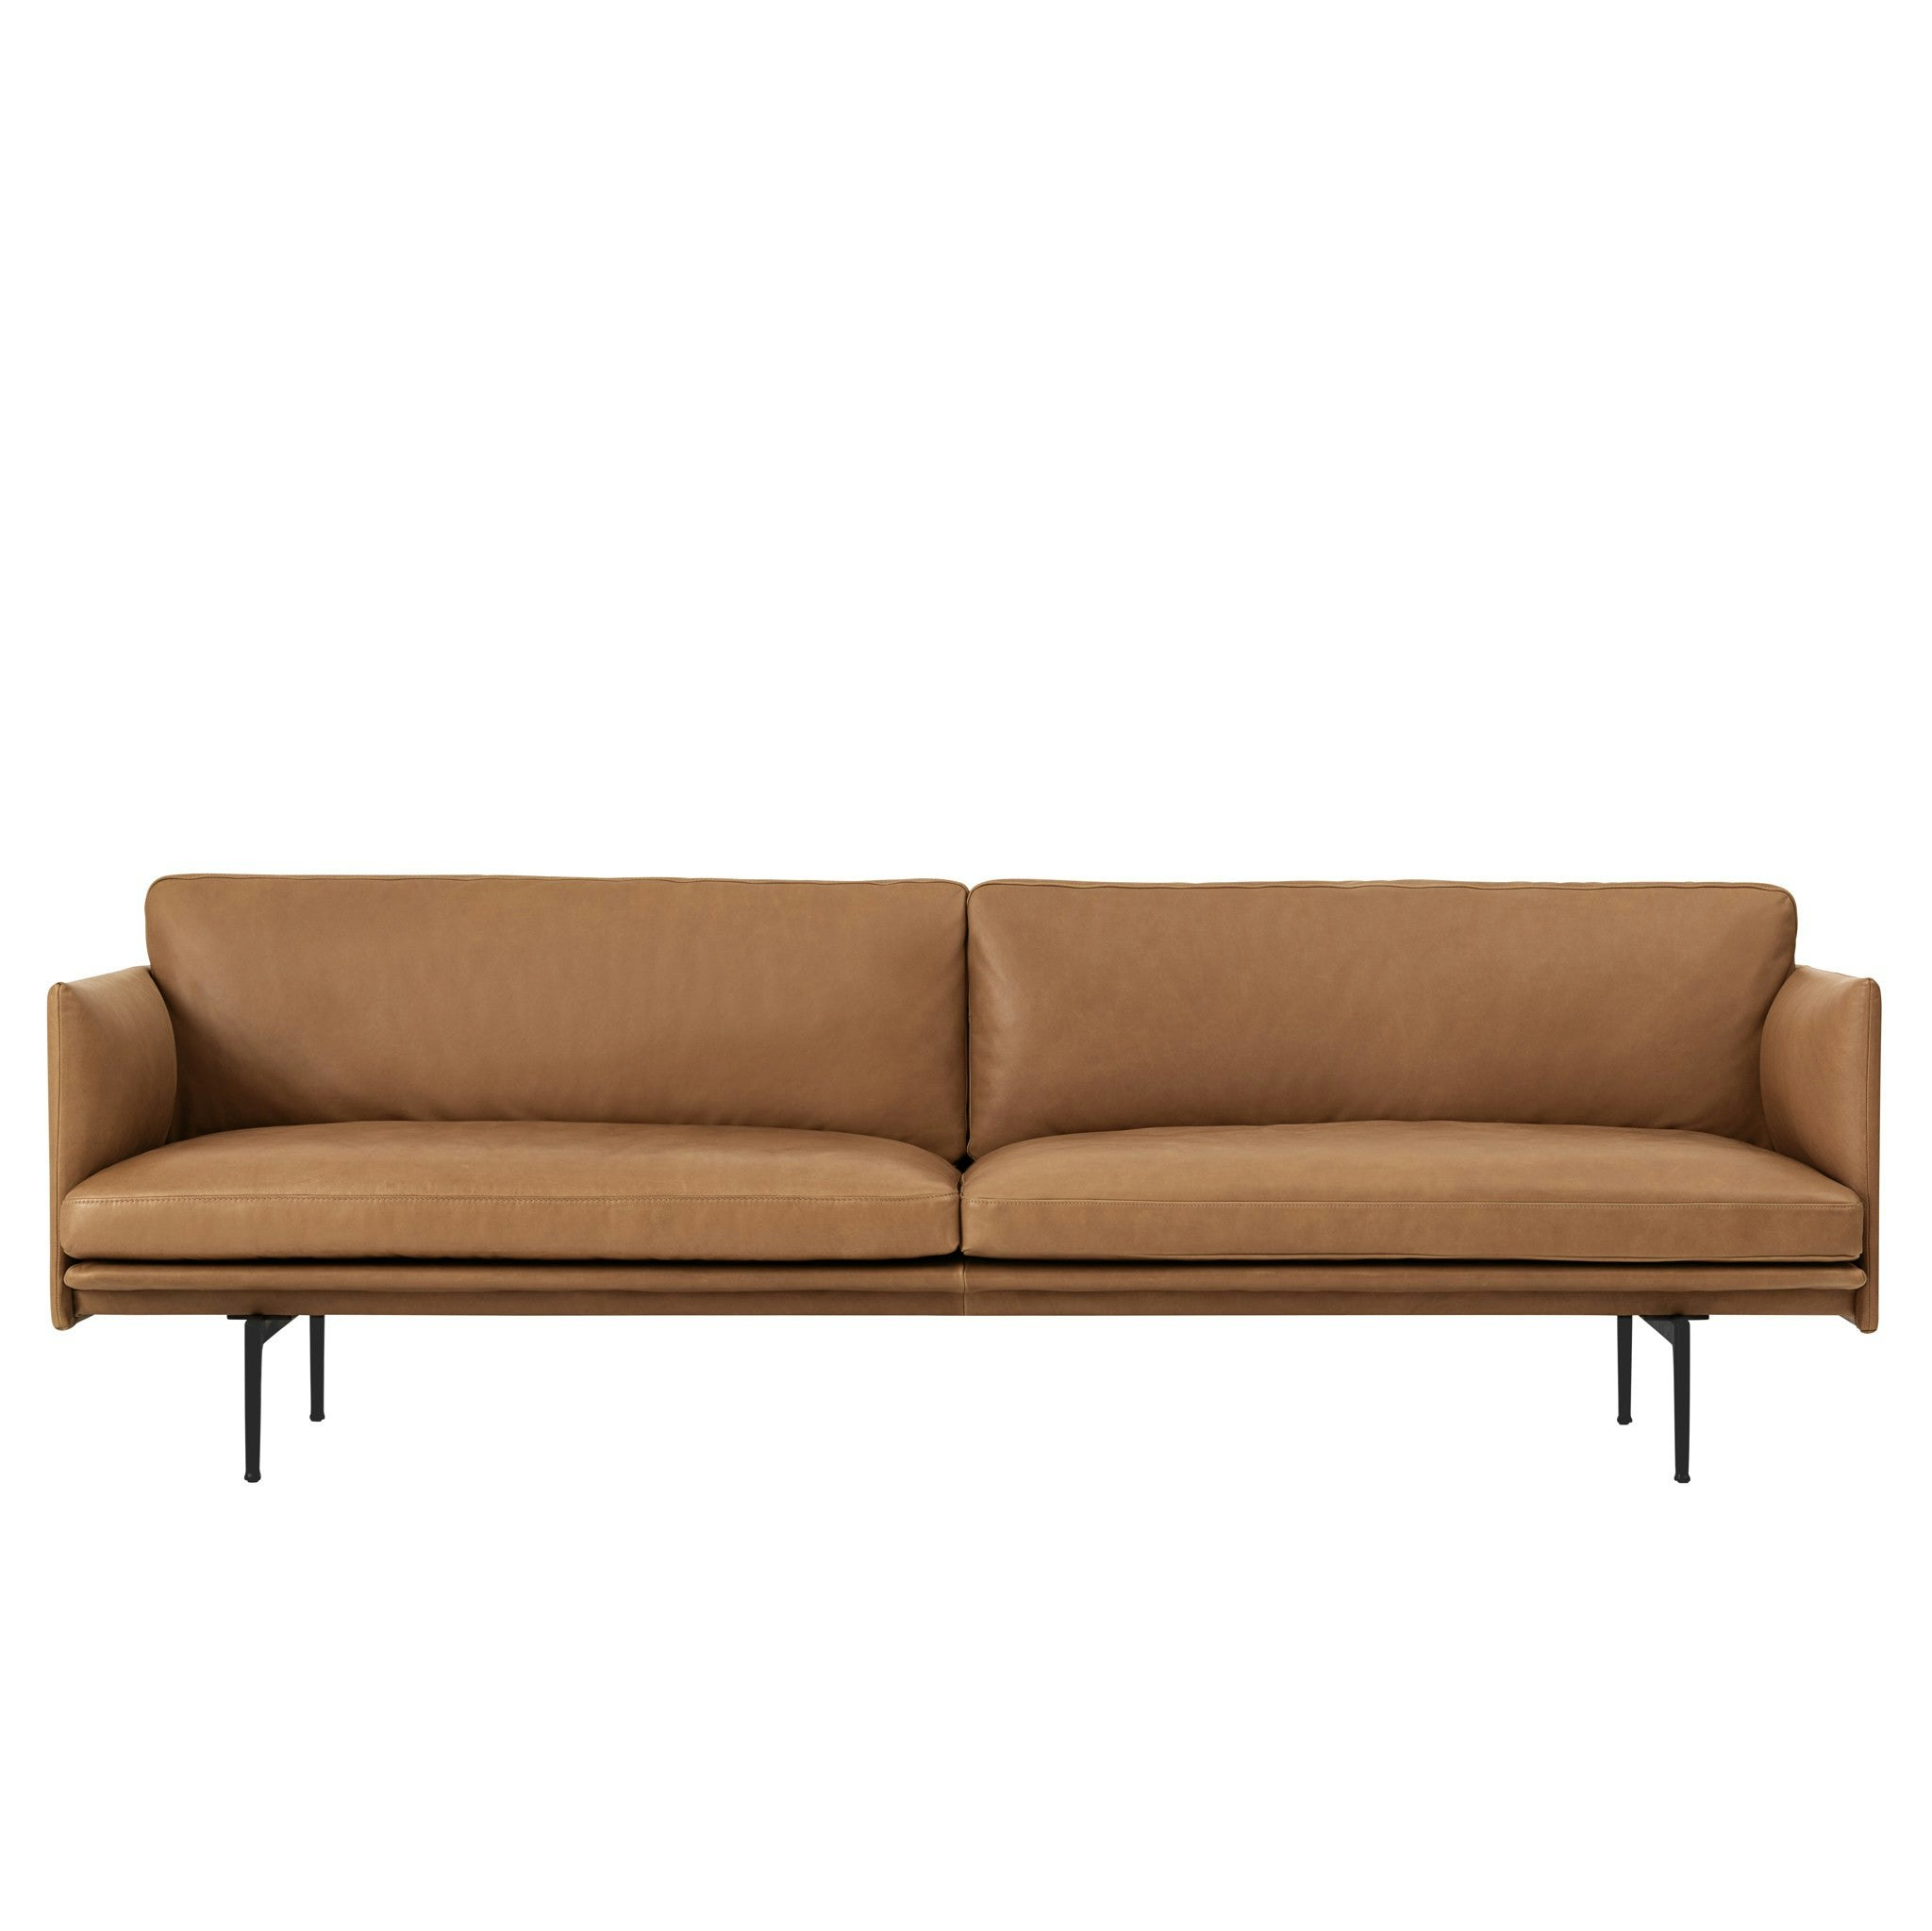 Outline Sofa by Muuto